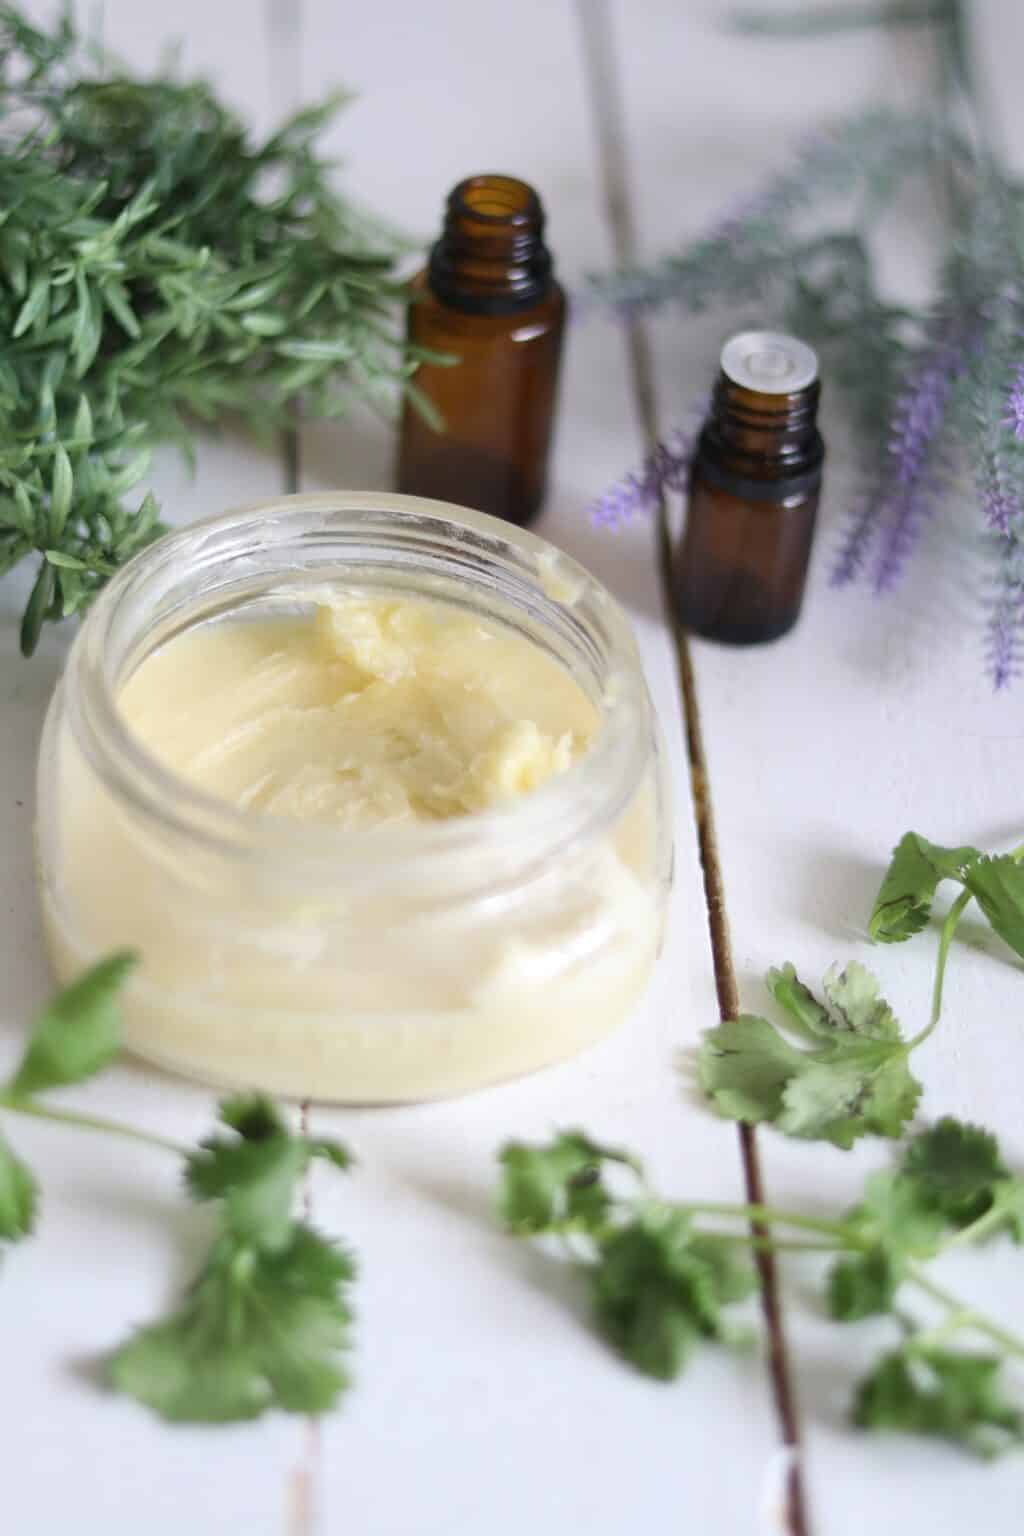 Homemade whipped body butter with lavender sprigs and essential oil bottles.